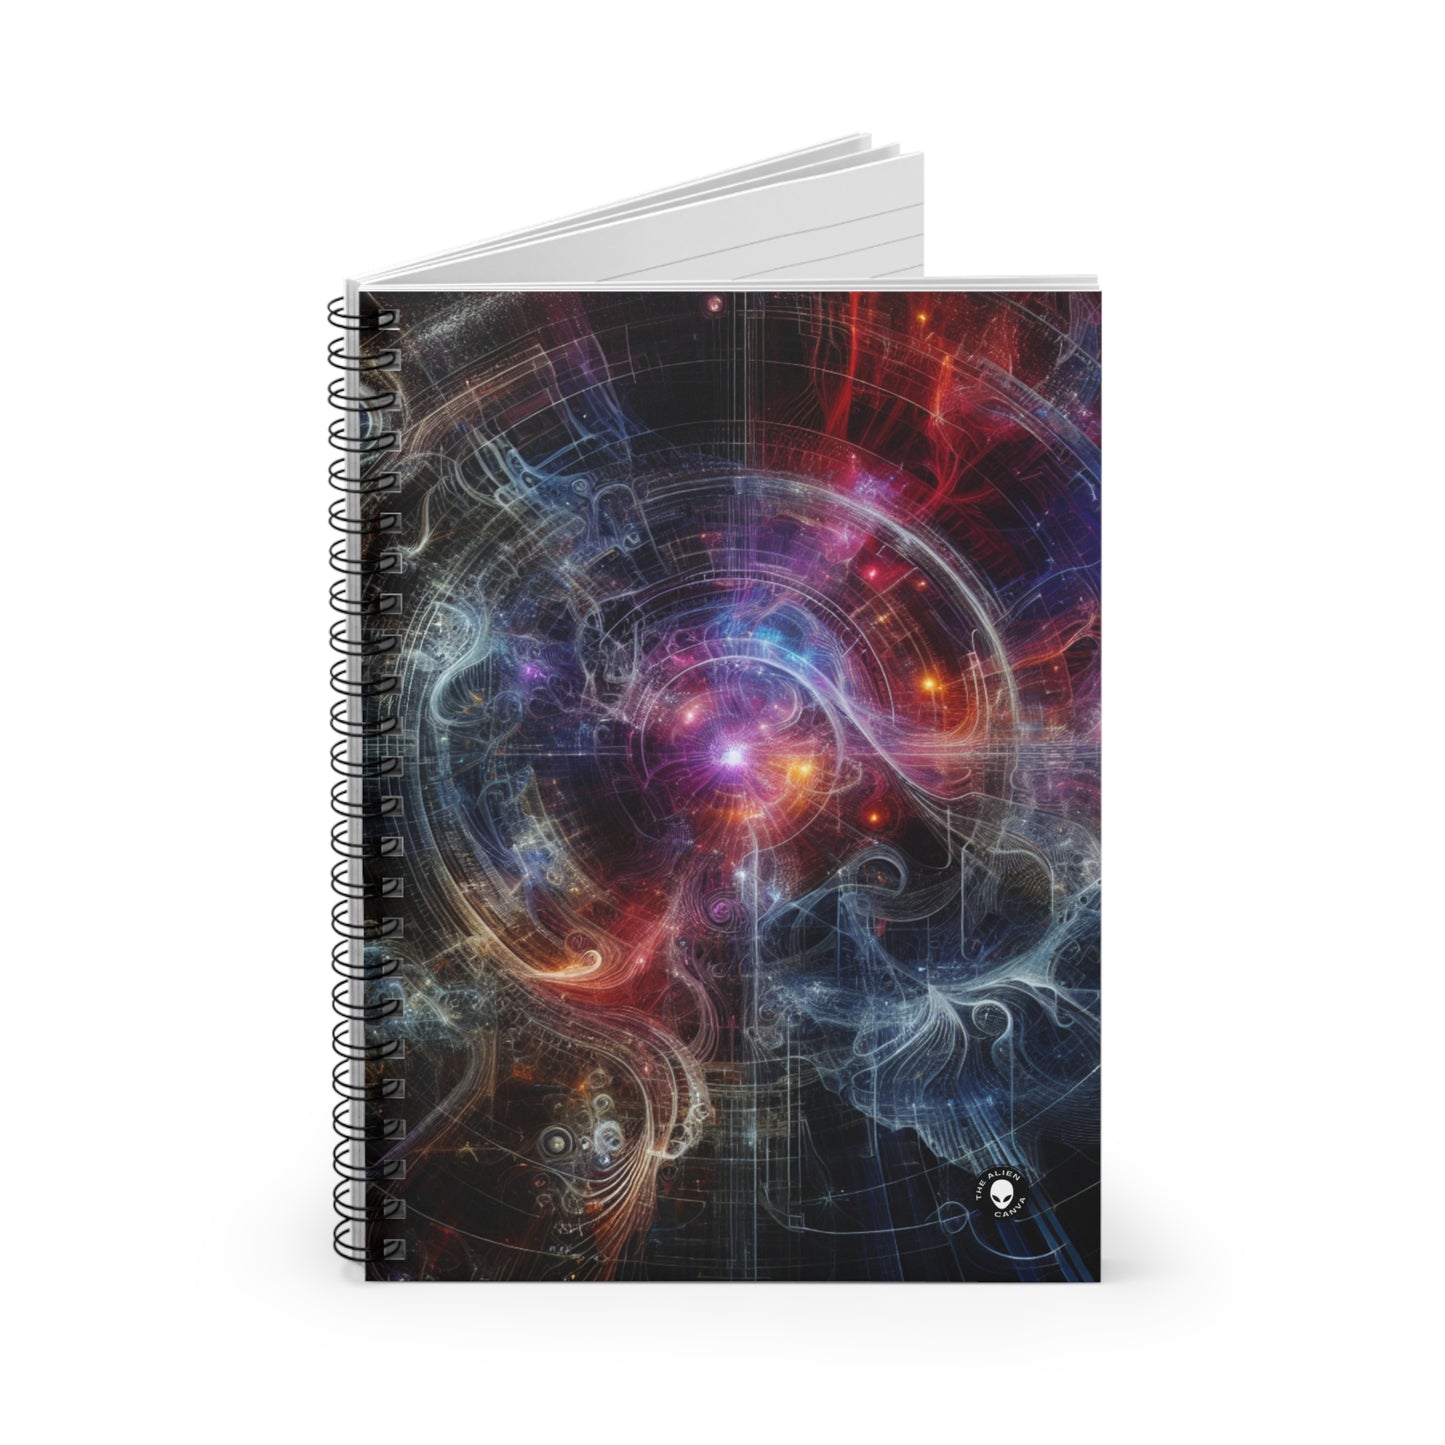 "Nature's Neon Metropolis: A Surreal Fusion of Technology and Greenery" - The Alien Spiral Notebook (Ruled Line) Digital Art